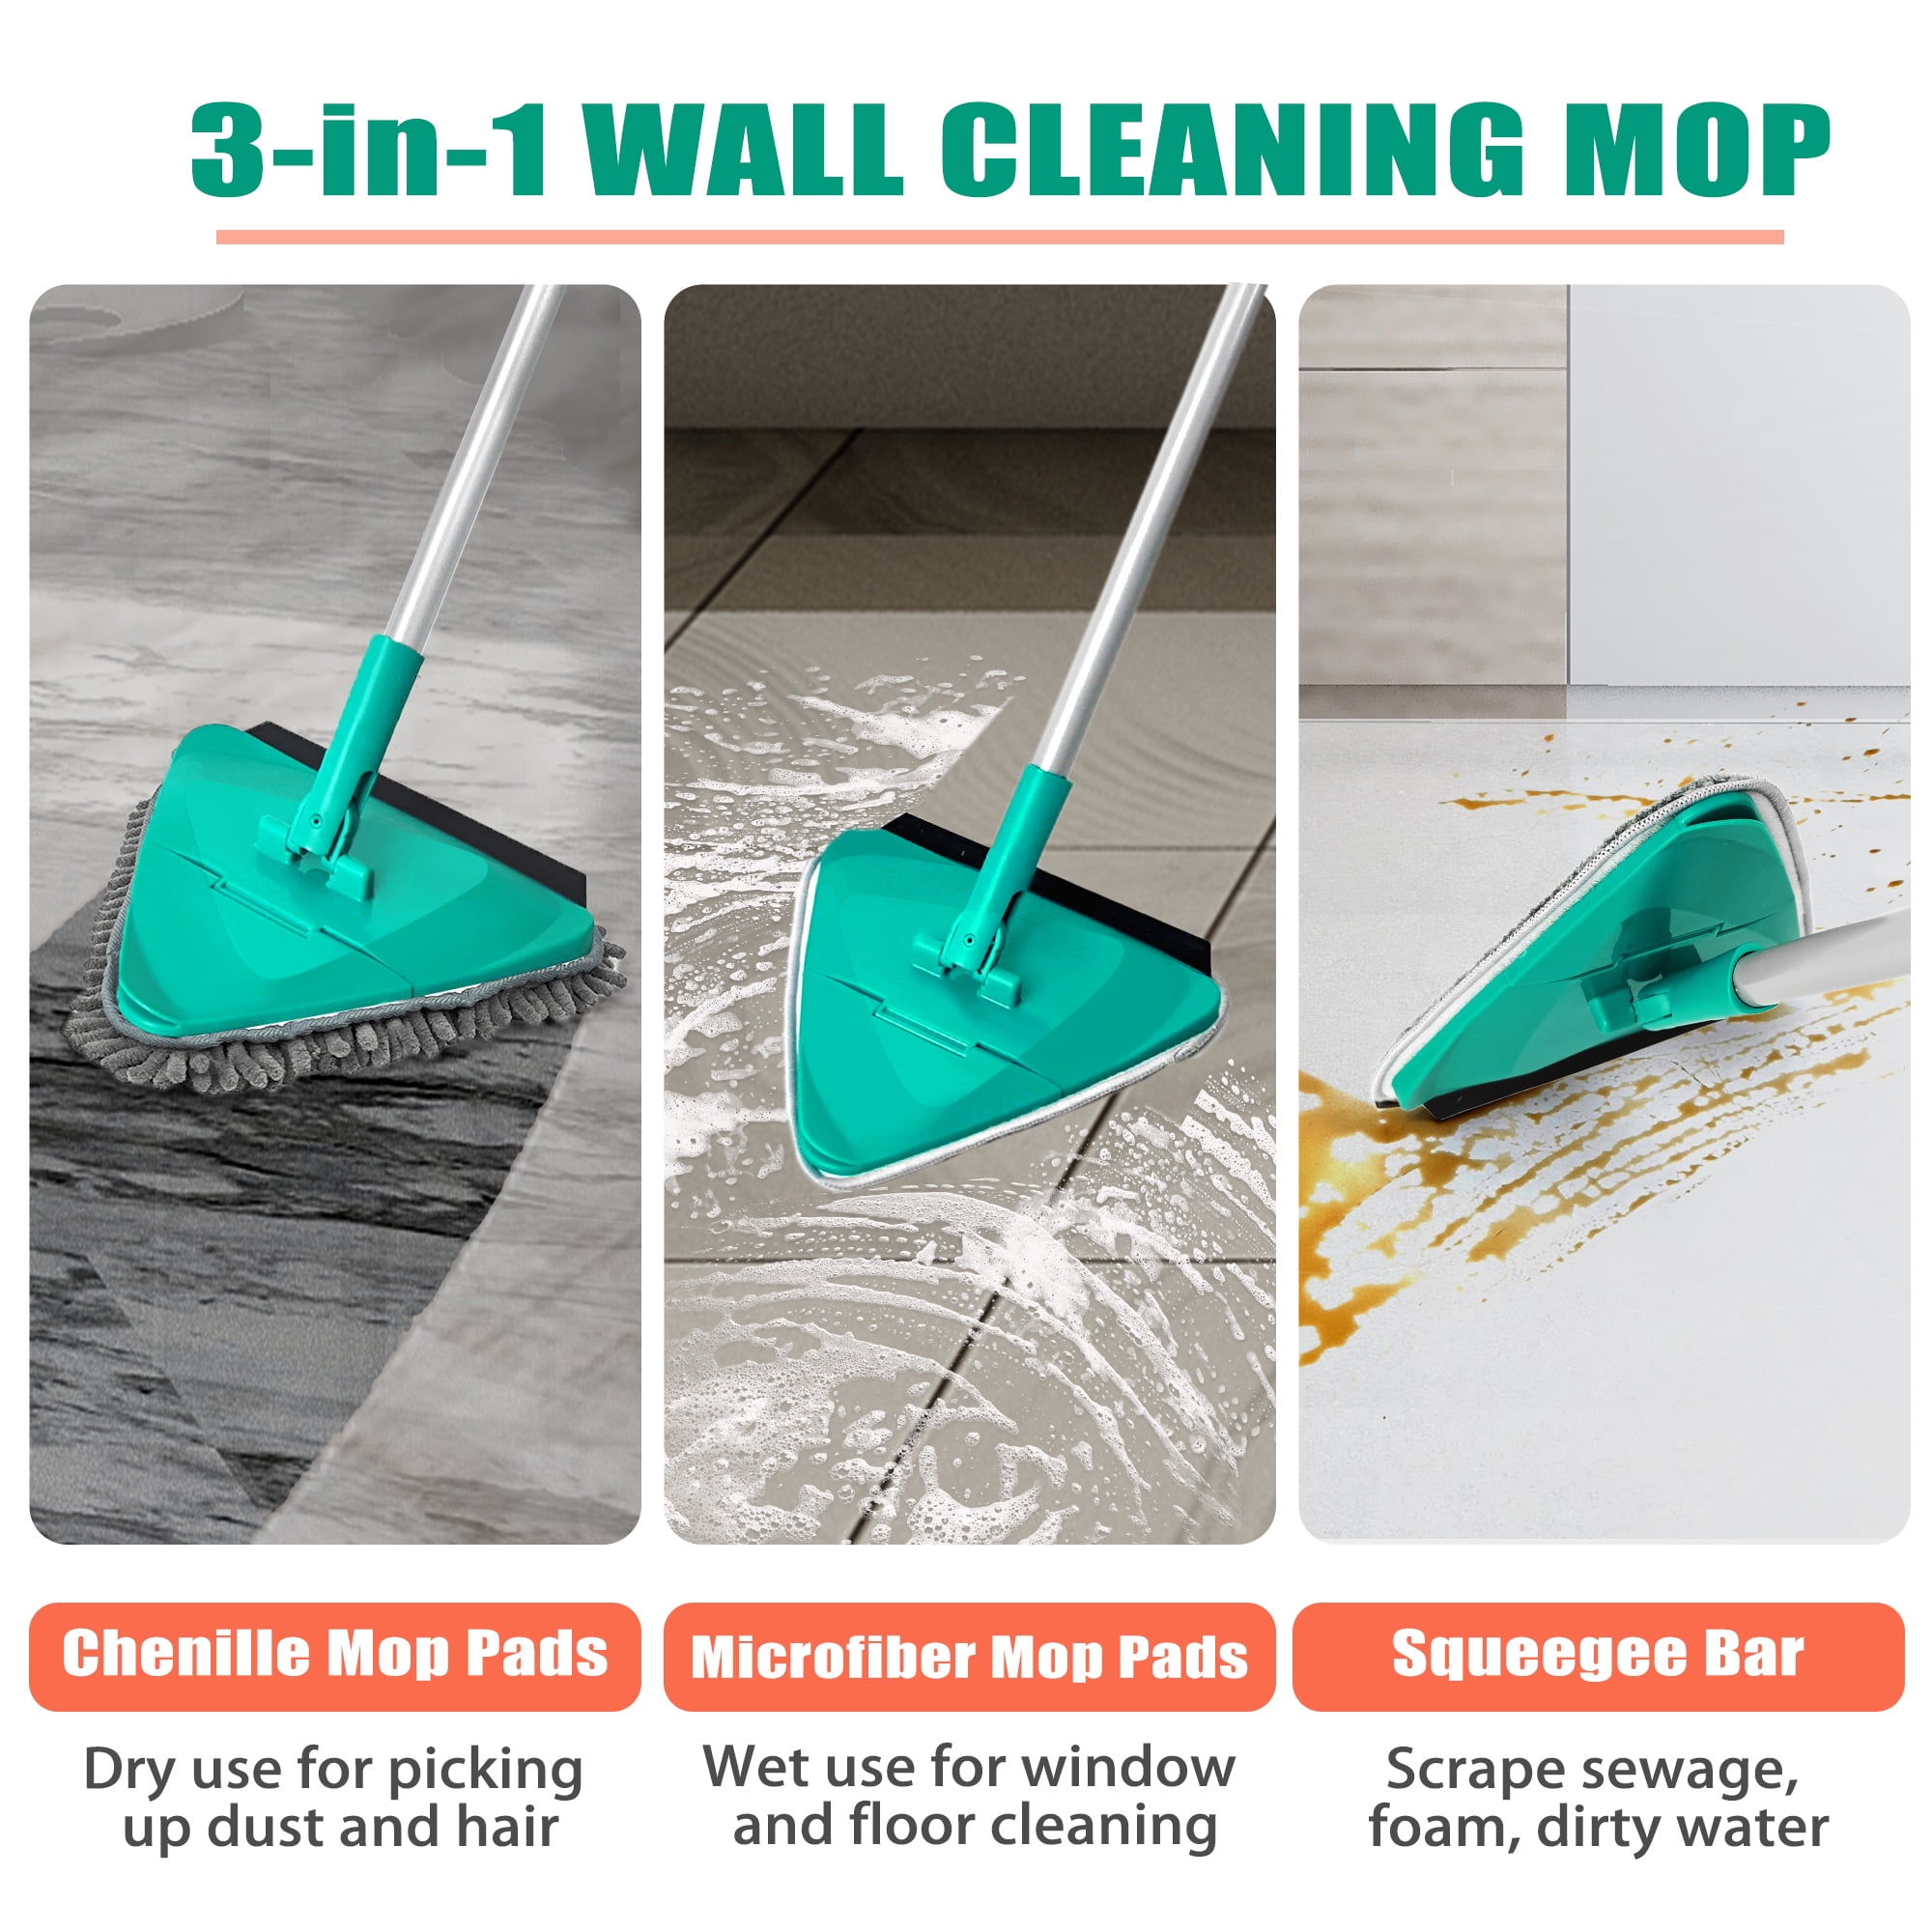 Wall Cleaner with Long Handle - 75in Ceiling Mop Wall and